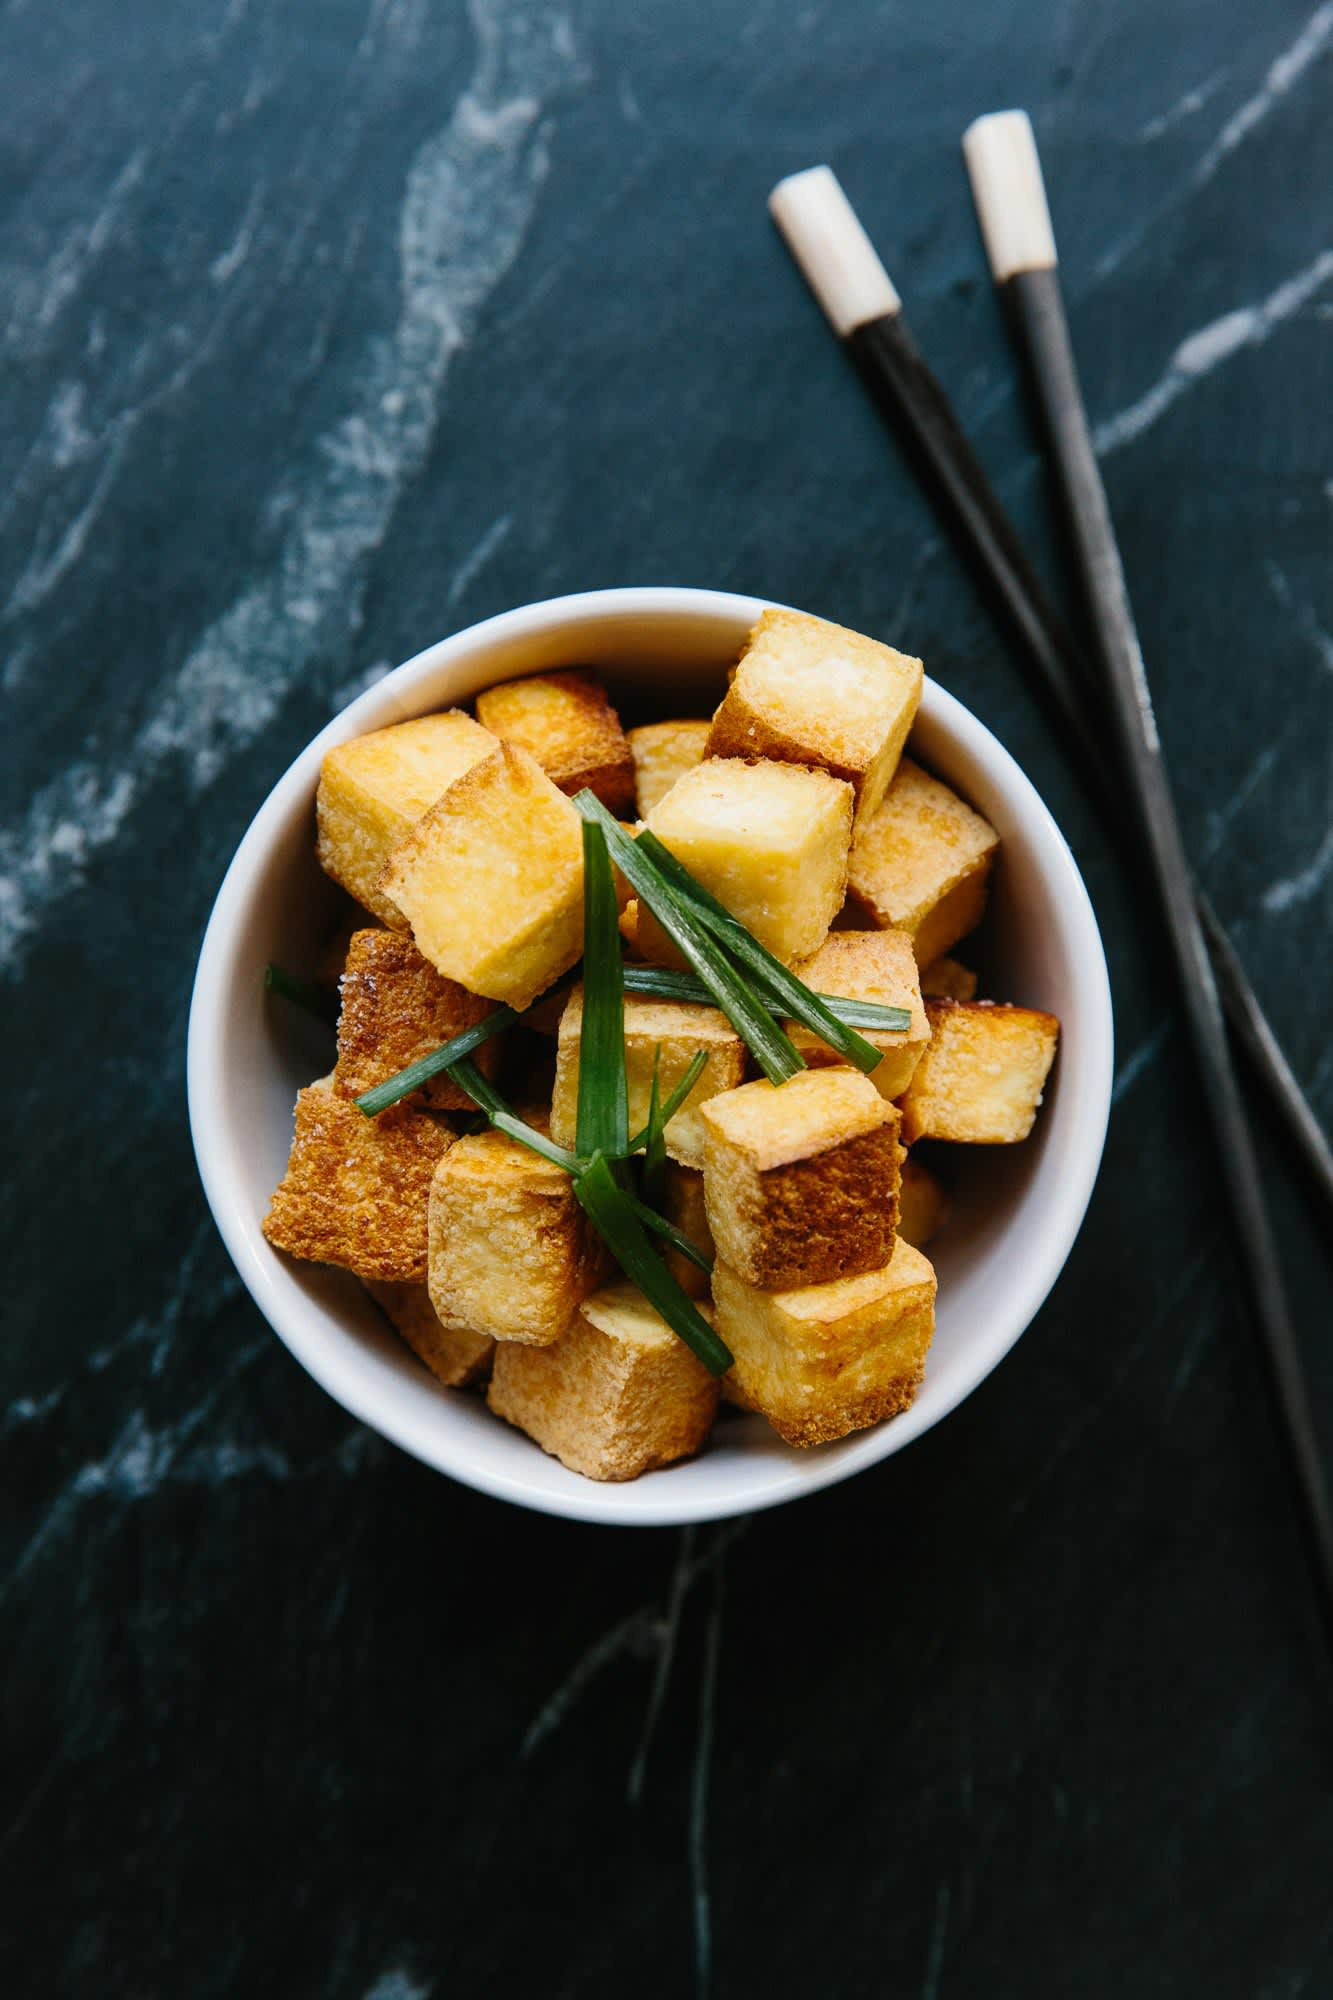 Tofu Recipes For Beginners
 A Guide to Cooking Tofu for Beginners Kitchn